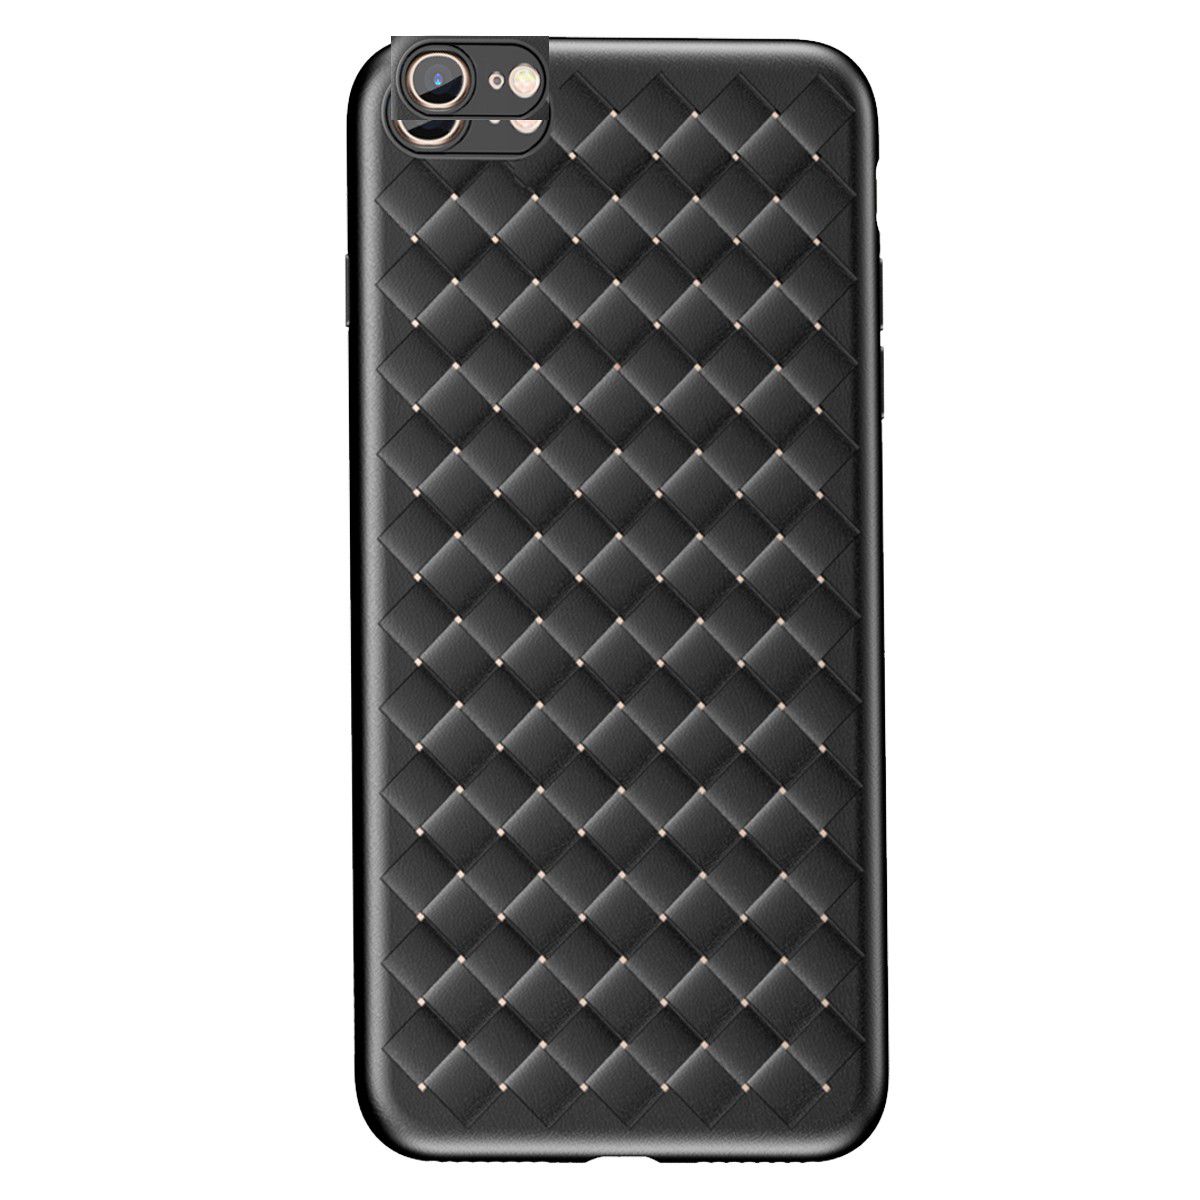 Baseus Waving Case Cover For Iphone 6 6s